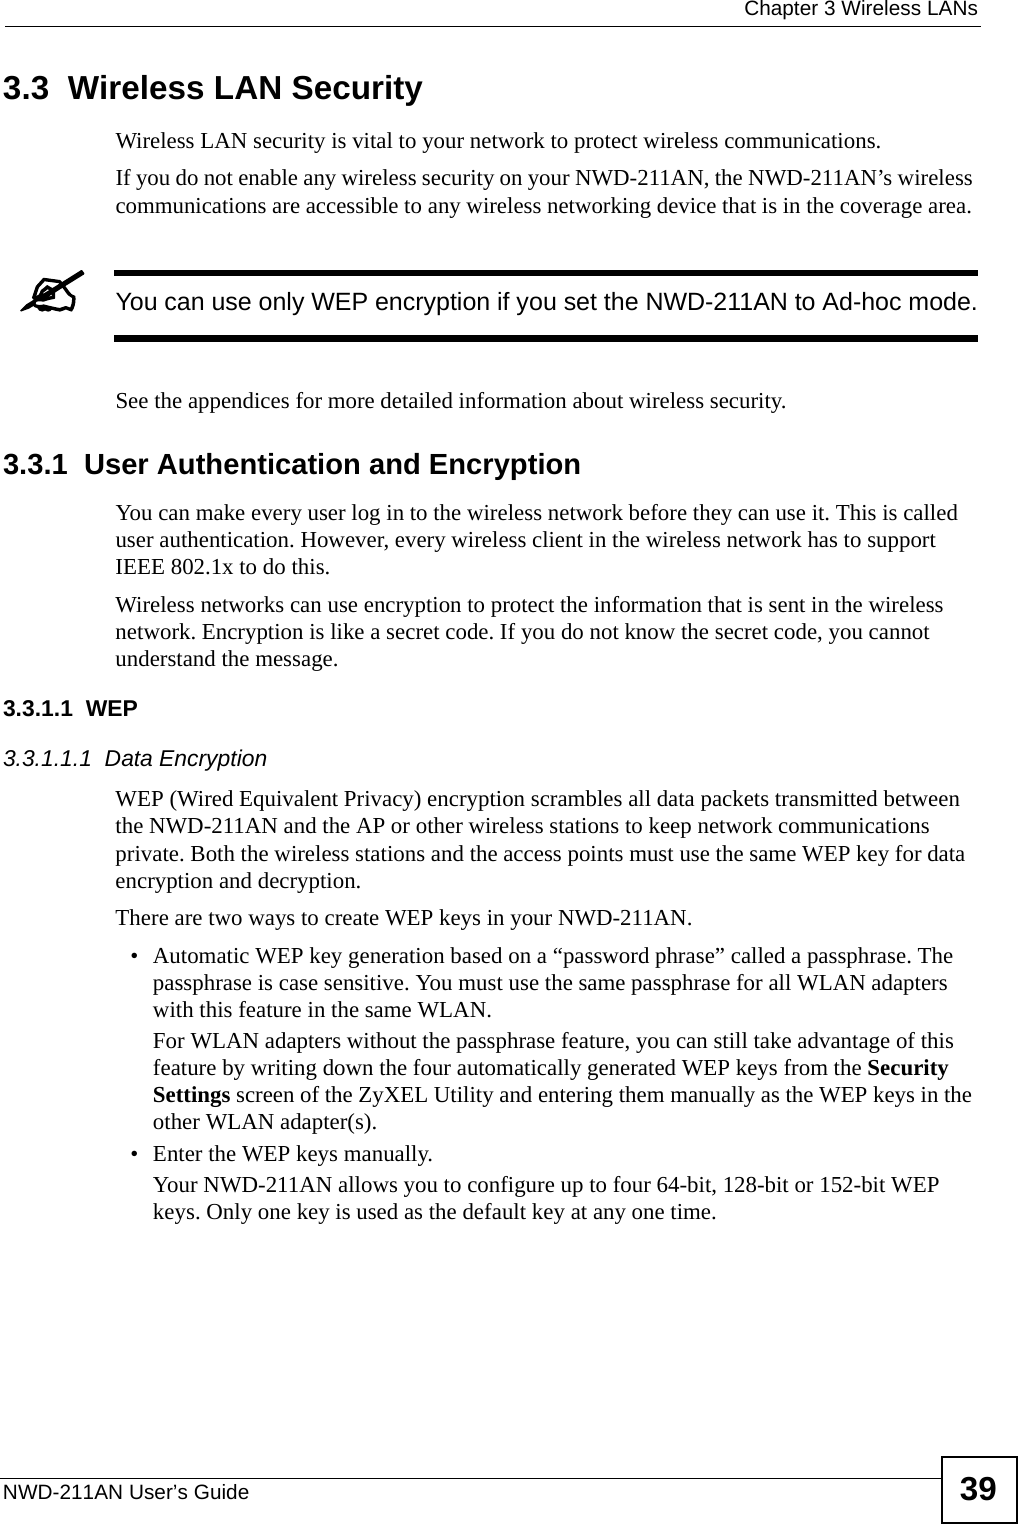  Chapter 3 Wireless LANsNWD-211AN User’s Guide 393.3  Wireless LAN Security Wireless LAN security is vital to your network to protect wireless communications.If you do not enable any wireless security on your NWD-211AN, the NWD-211AN’s wireless communications are accessible to any wireless networking device that is in the coverage area. &quot;You can use only WEP encryption if you set the NWD-211AN to Ad-hoc mode.See the appendices for more detailed information about wireless security.3.3.1  User Authentication and EncryptionYou can make every user log in to the wireless network before they can use it. This is called user authentication. However, every wireless client in the wireless network has to support IEEE 802.1x to do this.Wireless networks can use encryption to protect the information that is sent in the wireless network. Encryption is like a secret code. If you do not know the secret code, you cannot understand the message.3.3.1.1  WEP3.3.1.1.1  Data Encryption WEP (Wired Equivalent Privacy) encryption scrambles all data packets transmitted between the NWD-211AN and the AP or other wireless stations to keep network communications private. Both the wireless stations and the access points must use the same WEP key for data encryption and decryption.There are two ways to create WEP keys in your NWD-211AN.• Automatic WEP key generation based on a “password phrase” called a passphrase. The passphrase is case sensitive. You must use the same passphrase for all WLAN adapters with this feature in the same WLAN.For WLAN adapters without the passphrase feature, you can still take advantage of this feature by writing down the four automatically generated WEP keys from the Security Settings screen of the ZyXEL Utility and entering them manually as the WEP keys in the other WLAN adapter(s).• Enter the WEP keys manually.Your NWD-211AN allows you to configure up to four 64-bit, 128-bit or 152-bit WEP keys. Only one key is used as the default key at any one time.